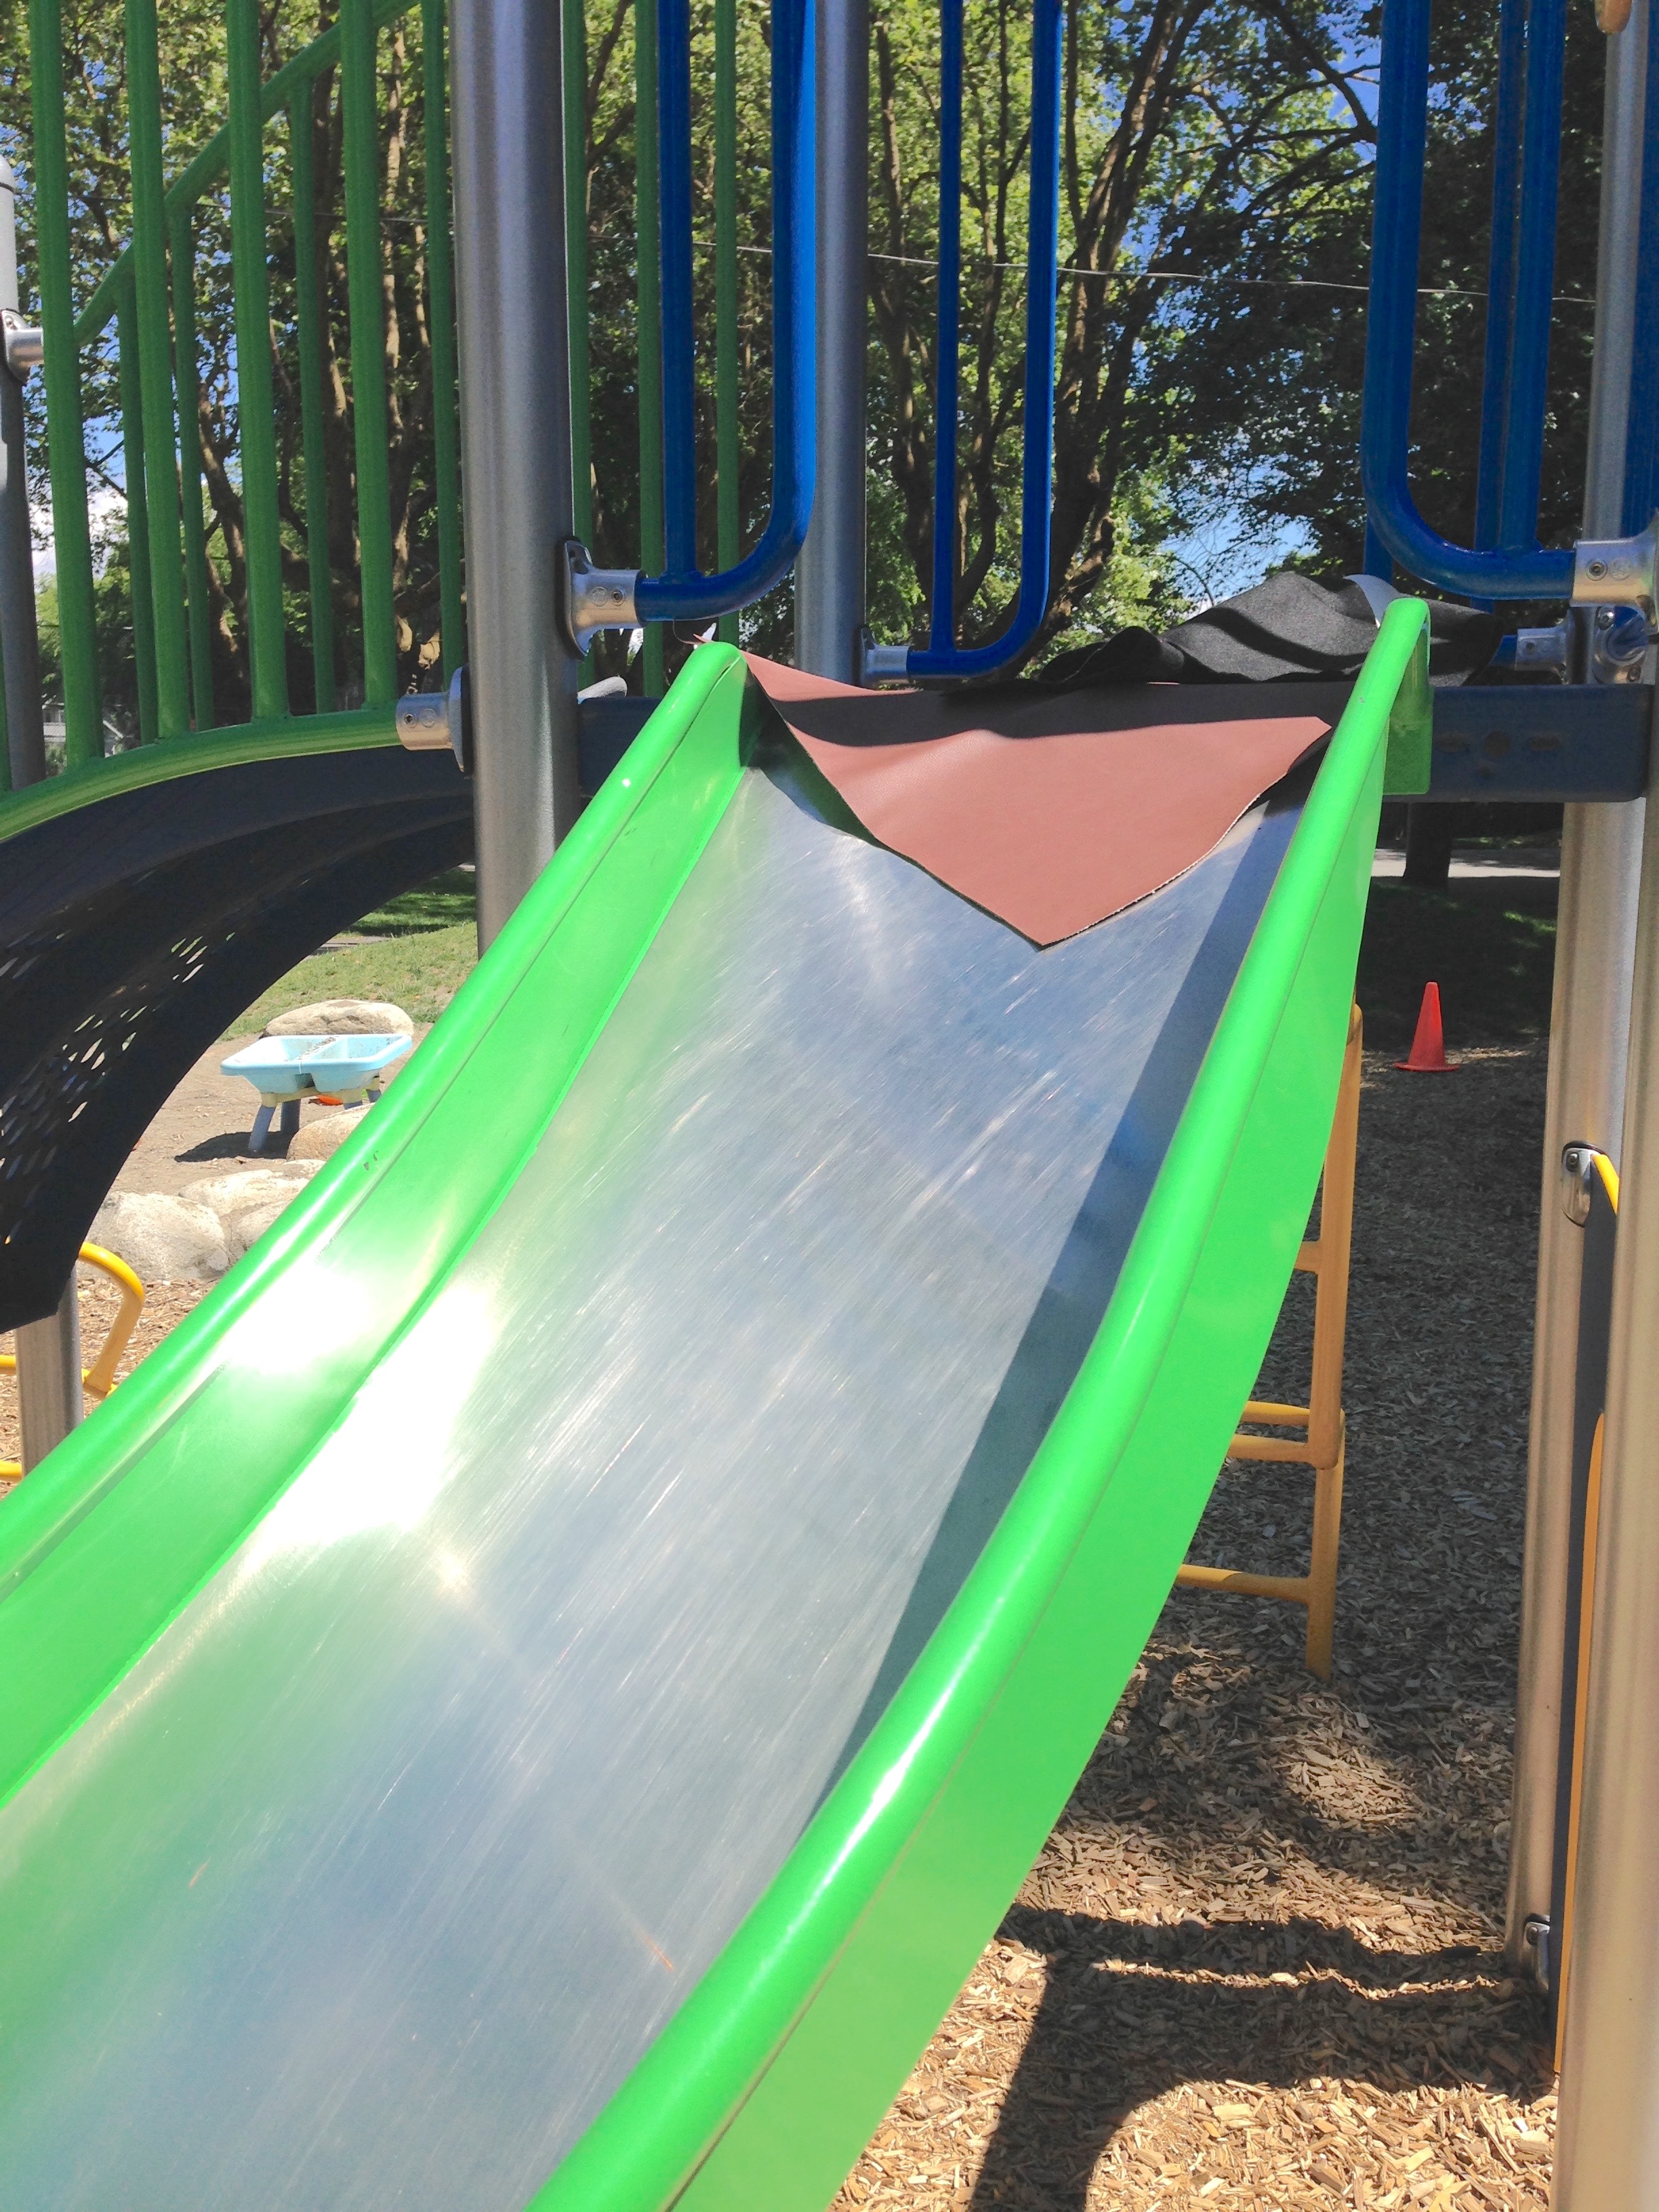 Playground equipment motion, forces and energy | ingridscience.ca